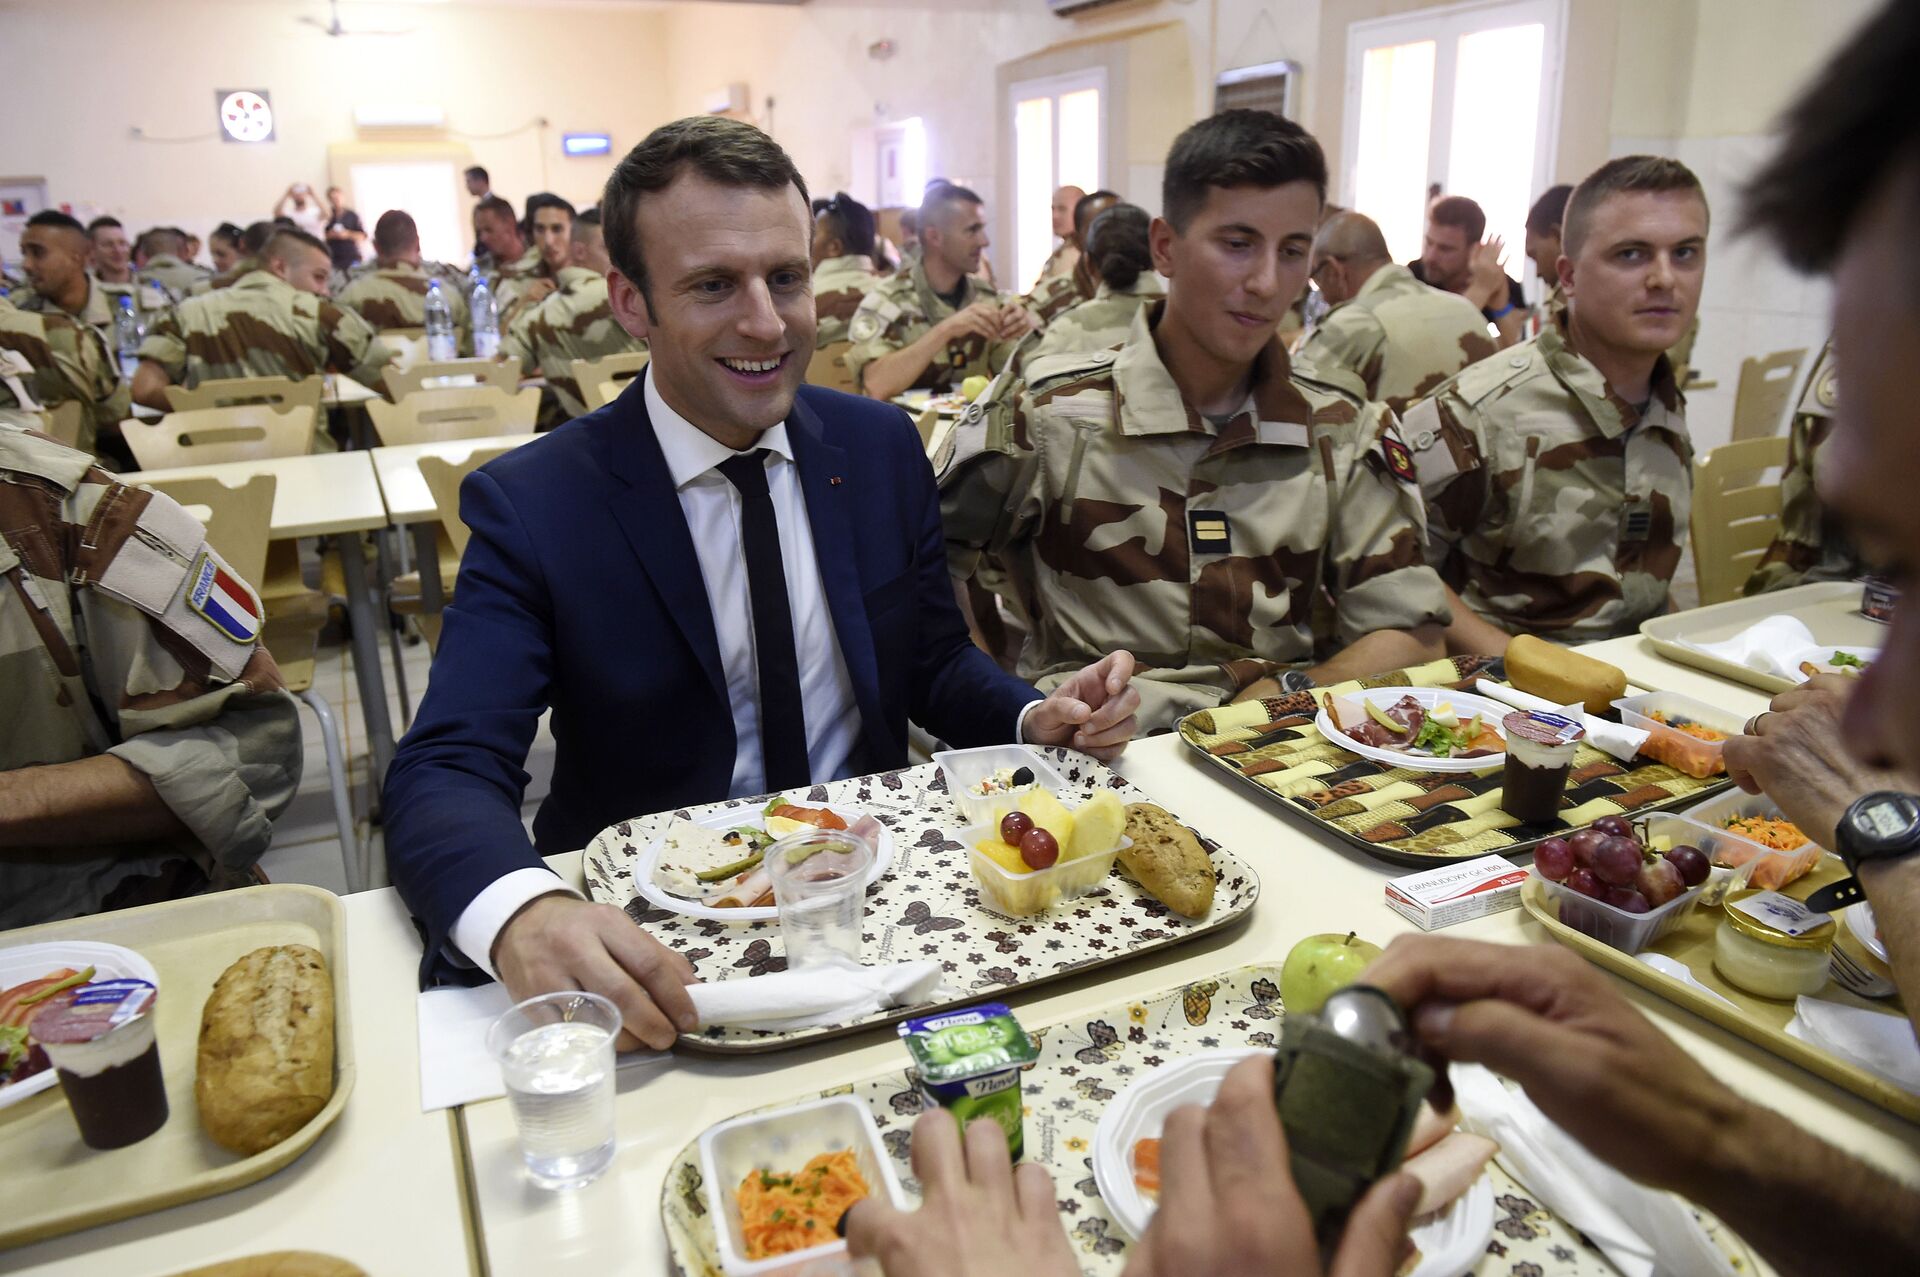 French President Emmanuel Macron (C) has a lunch break with French troops during his visit to France's Barkhane counter-terrorism operation in Africa's Sahel region in Gao, northern Mali, on May 19, 2017.  - Sputnik International, 1920, 05.05.2022